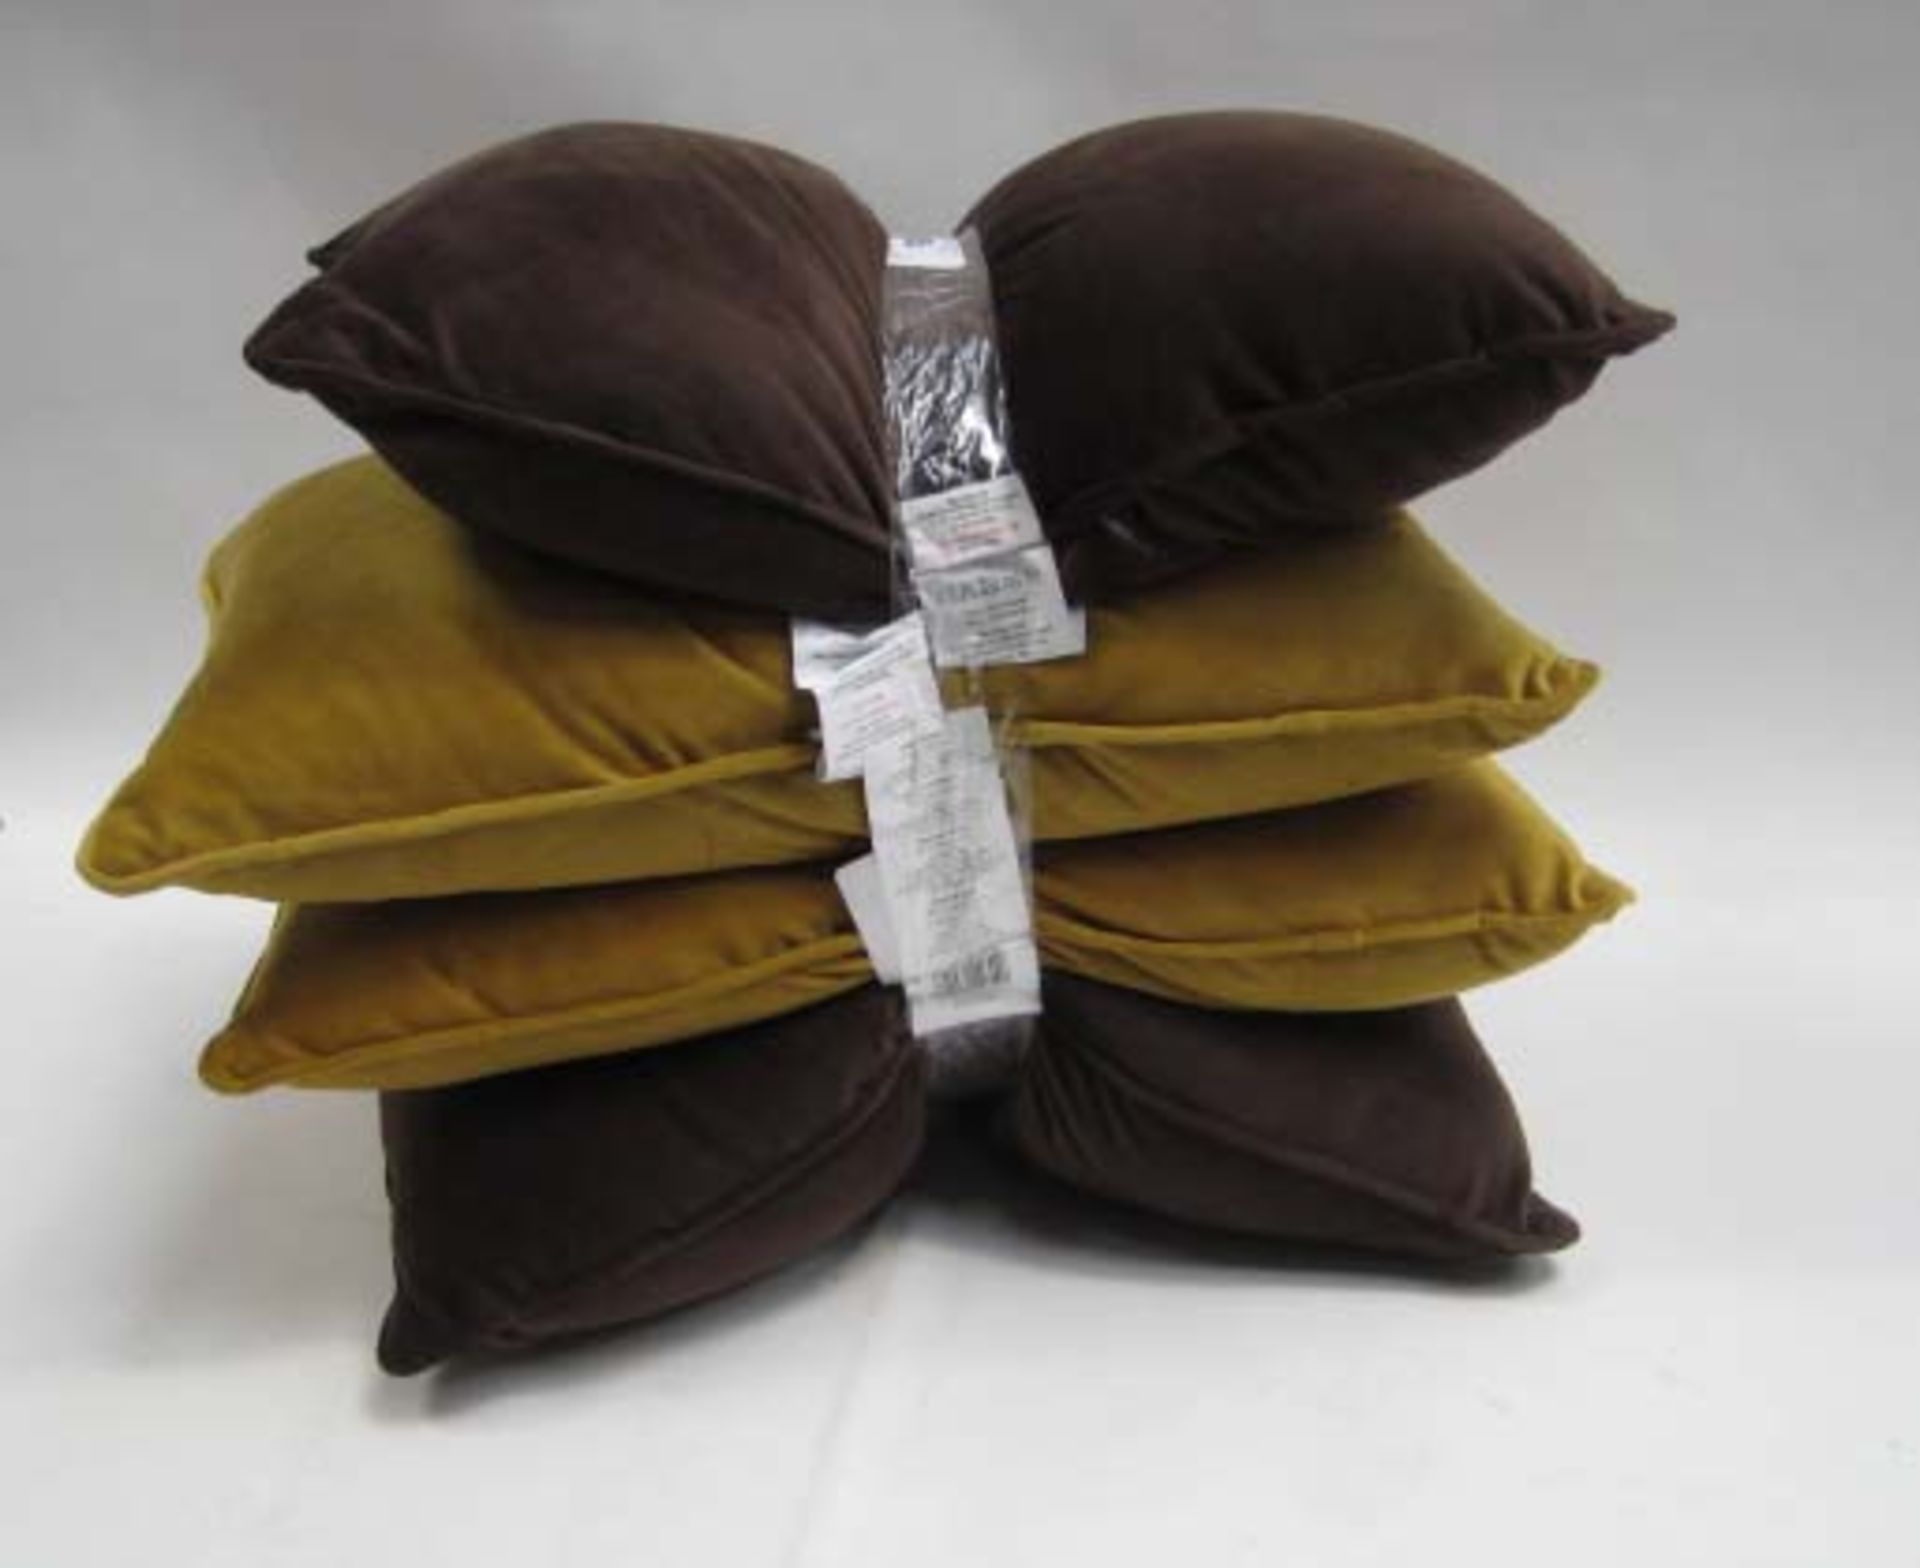 4 small rectangular pillows, 2 in dark brown and 2 in mustard colour